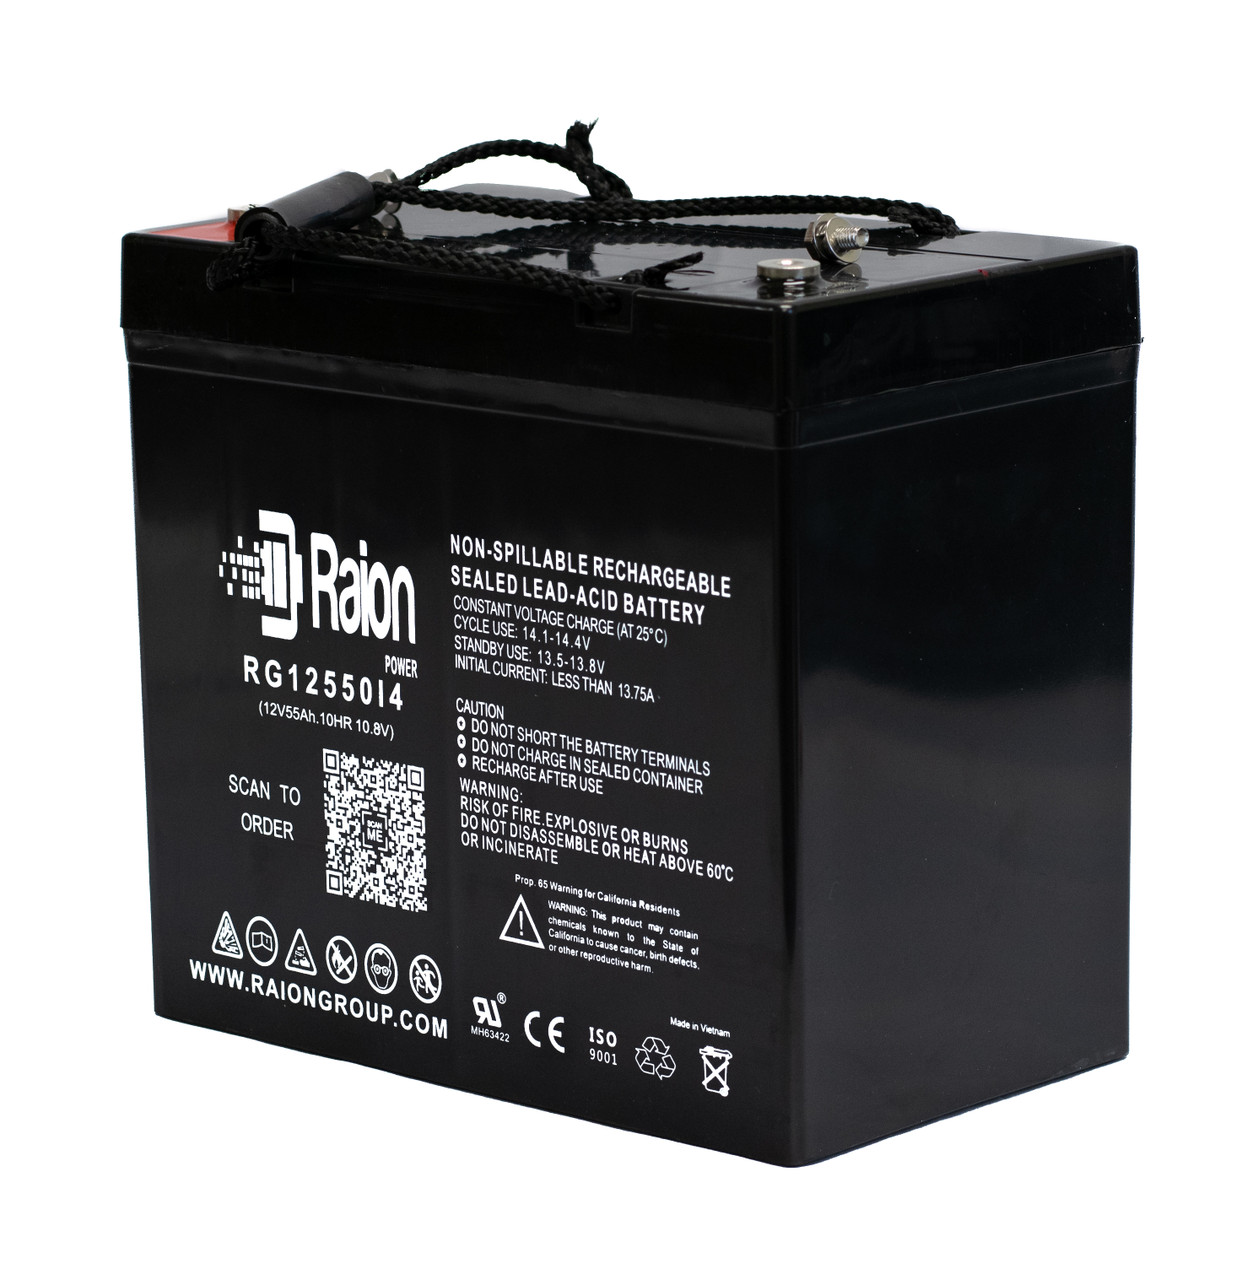 Raion Power 12V 55Ah 22NF Mobility Scooter Battery Replacement for DCC Shoprider Sprinter Deluxe